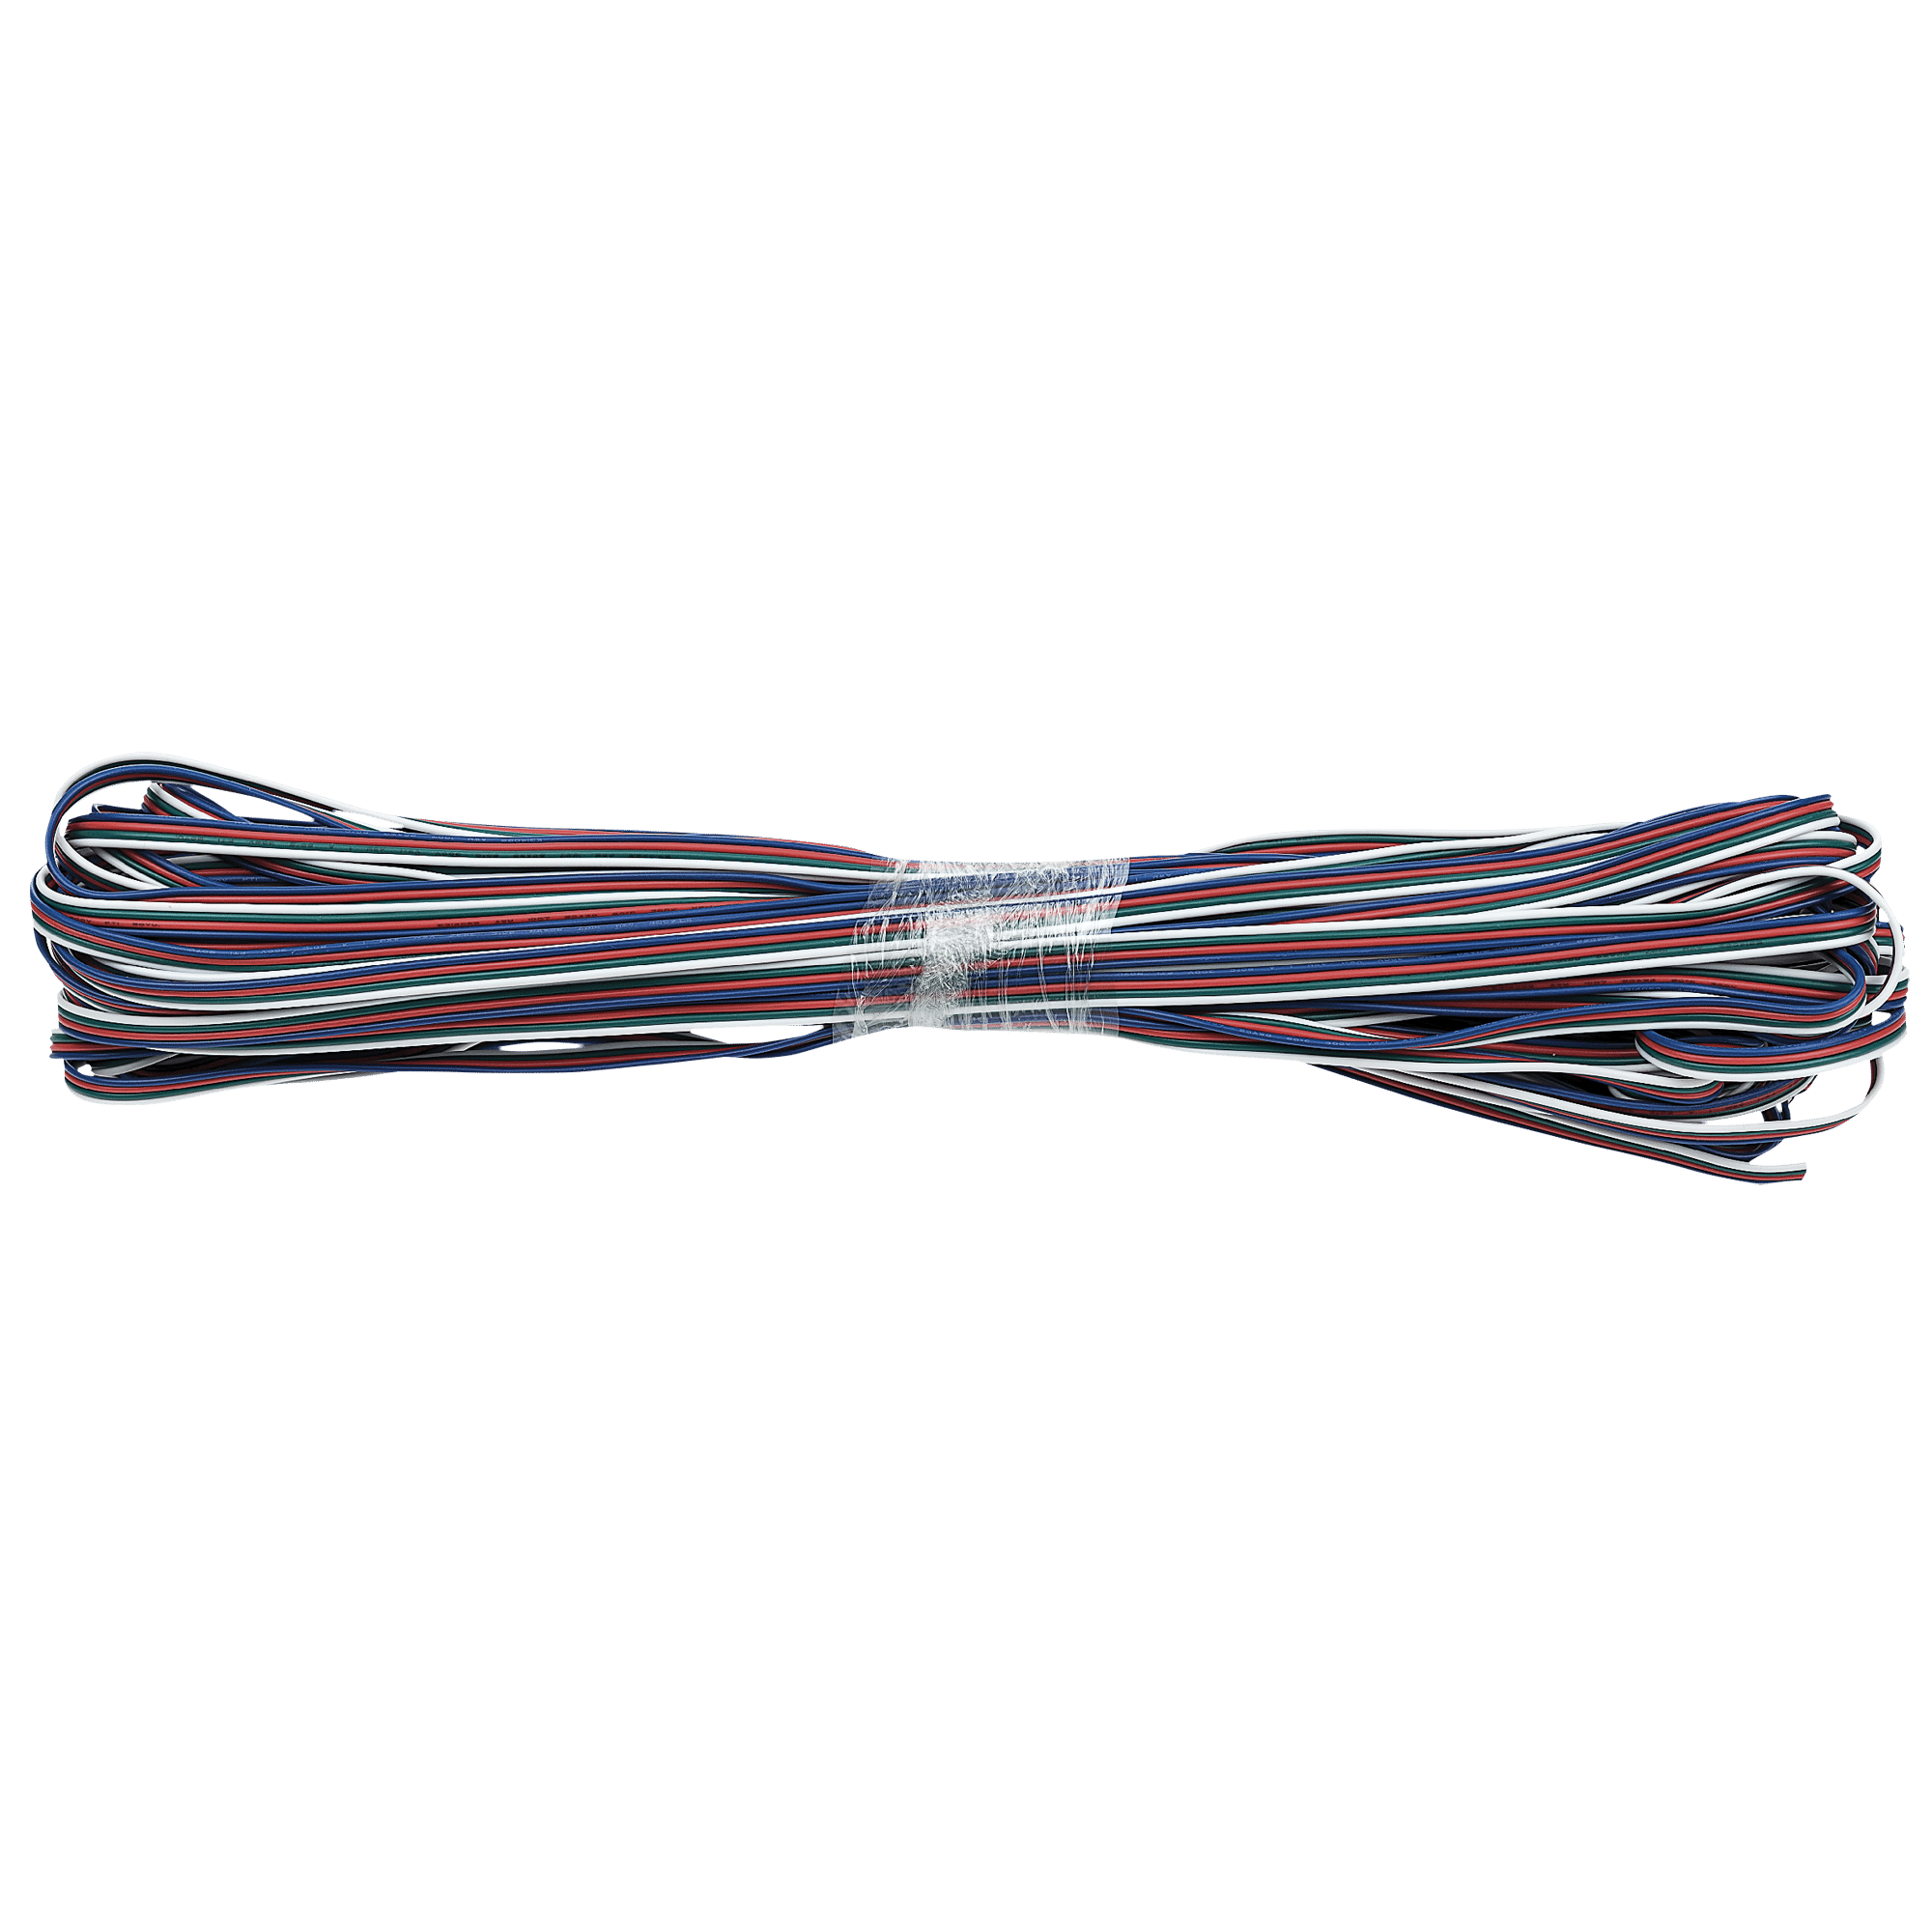 RGB Flat Cable - Onlinediscowinkel.nl